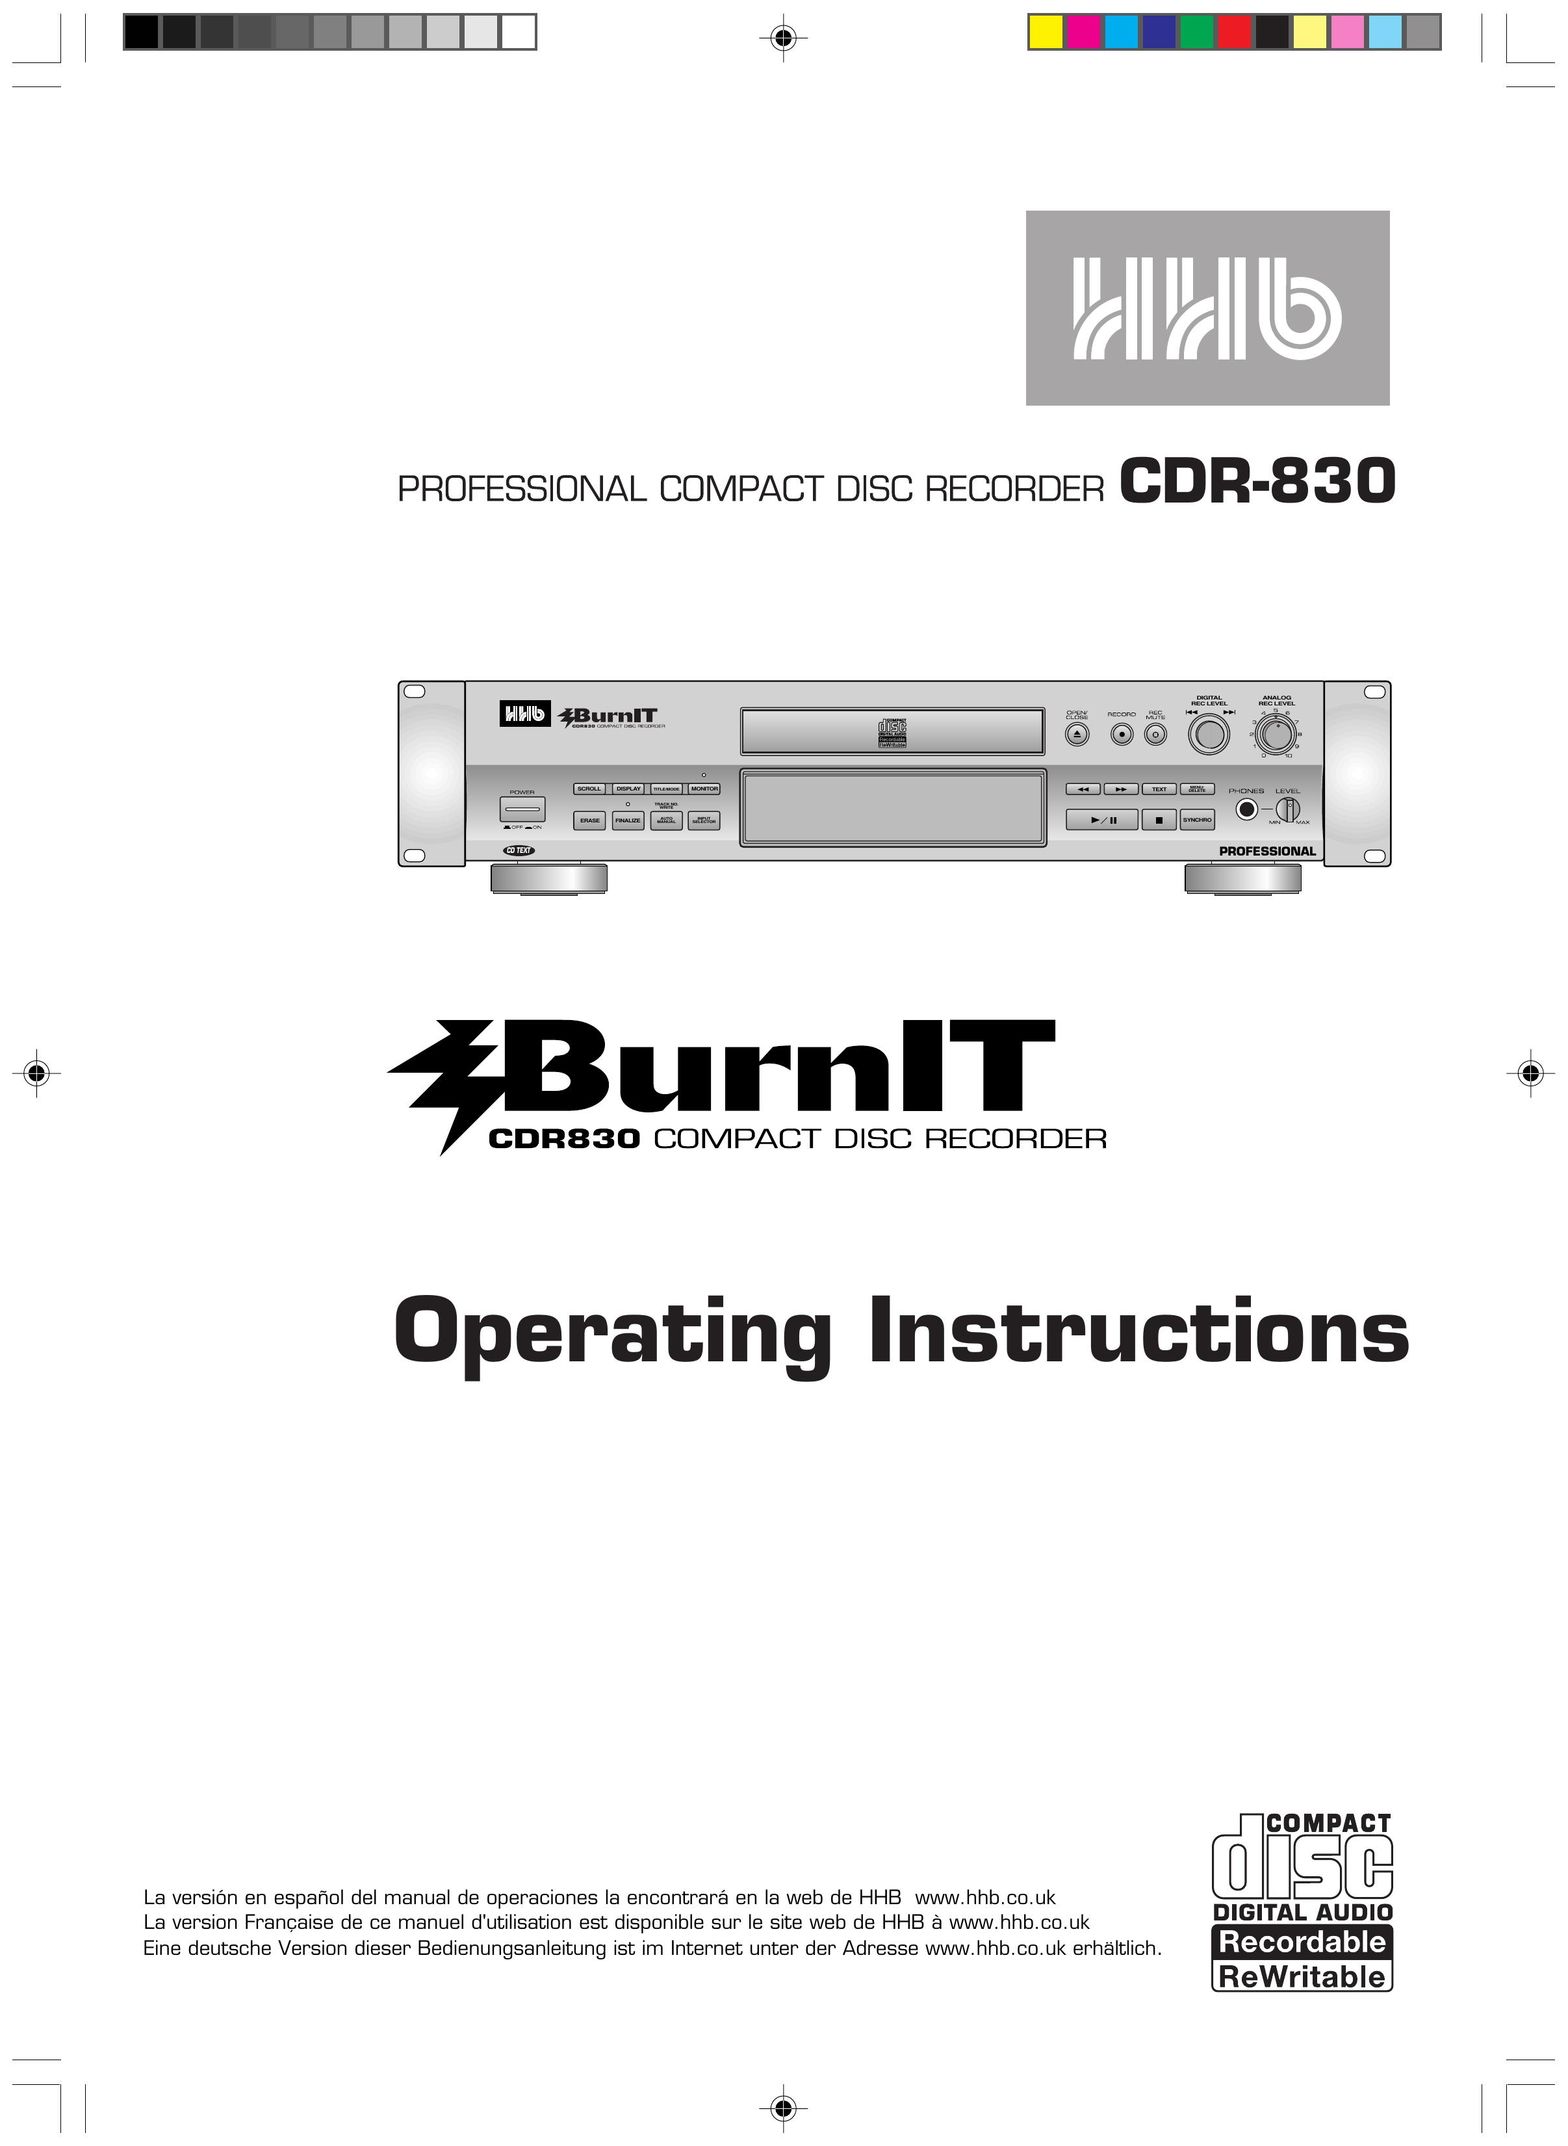 HHB comm CDR 830 CD Player User Manual